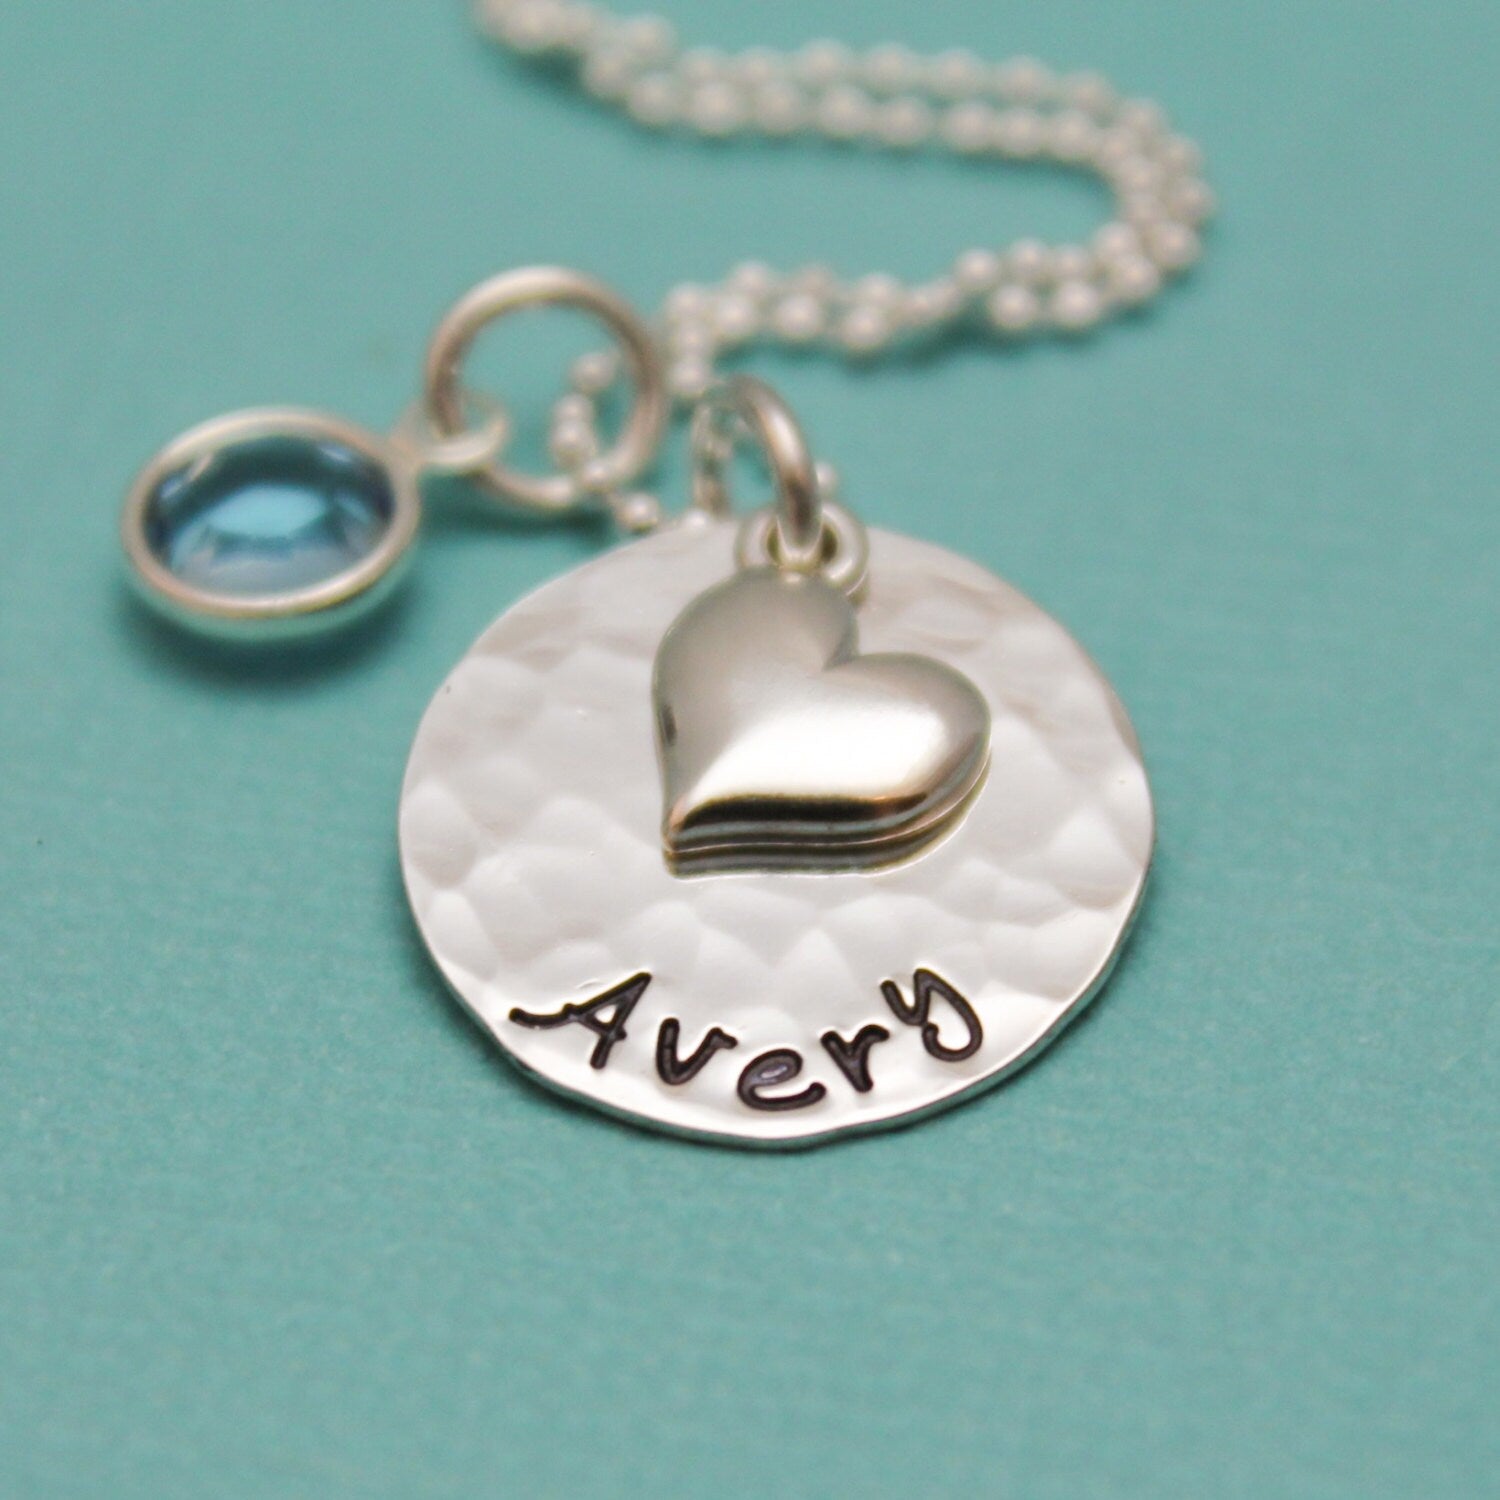 Aunt Necklace, Auntie Necklace, Aunt Gift, Gifts for Aunties, Hand Stamped Necklace, Personalized Jewelry, Aunt Necklace with Birthstones